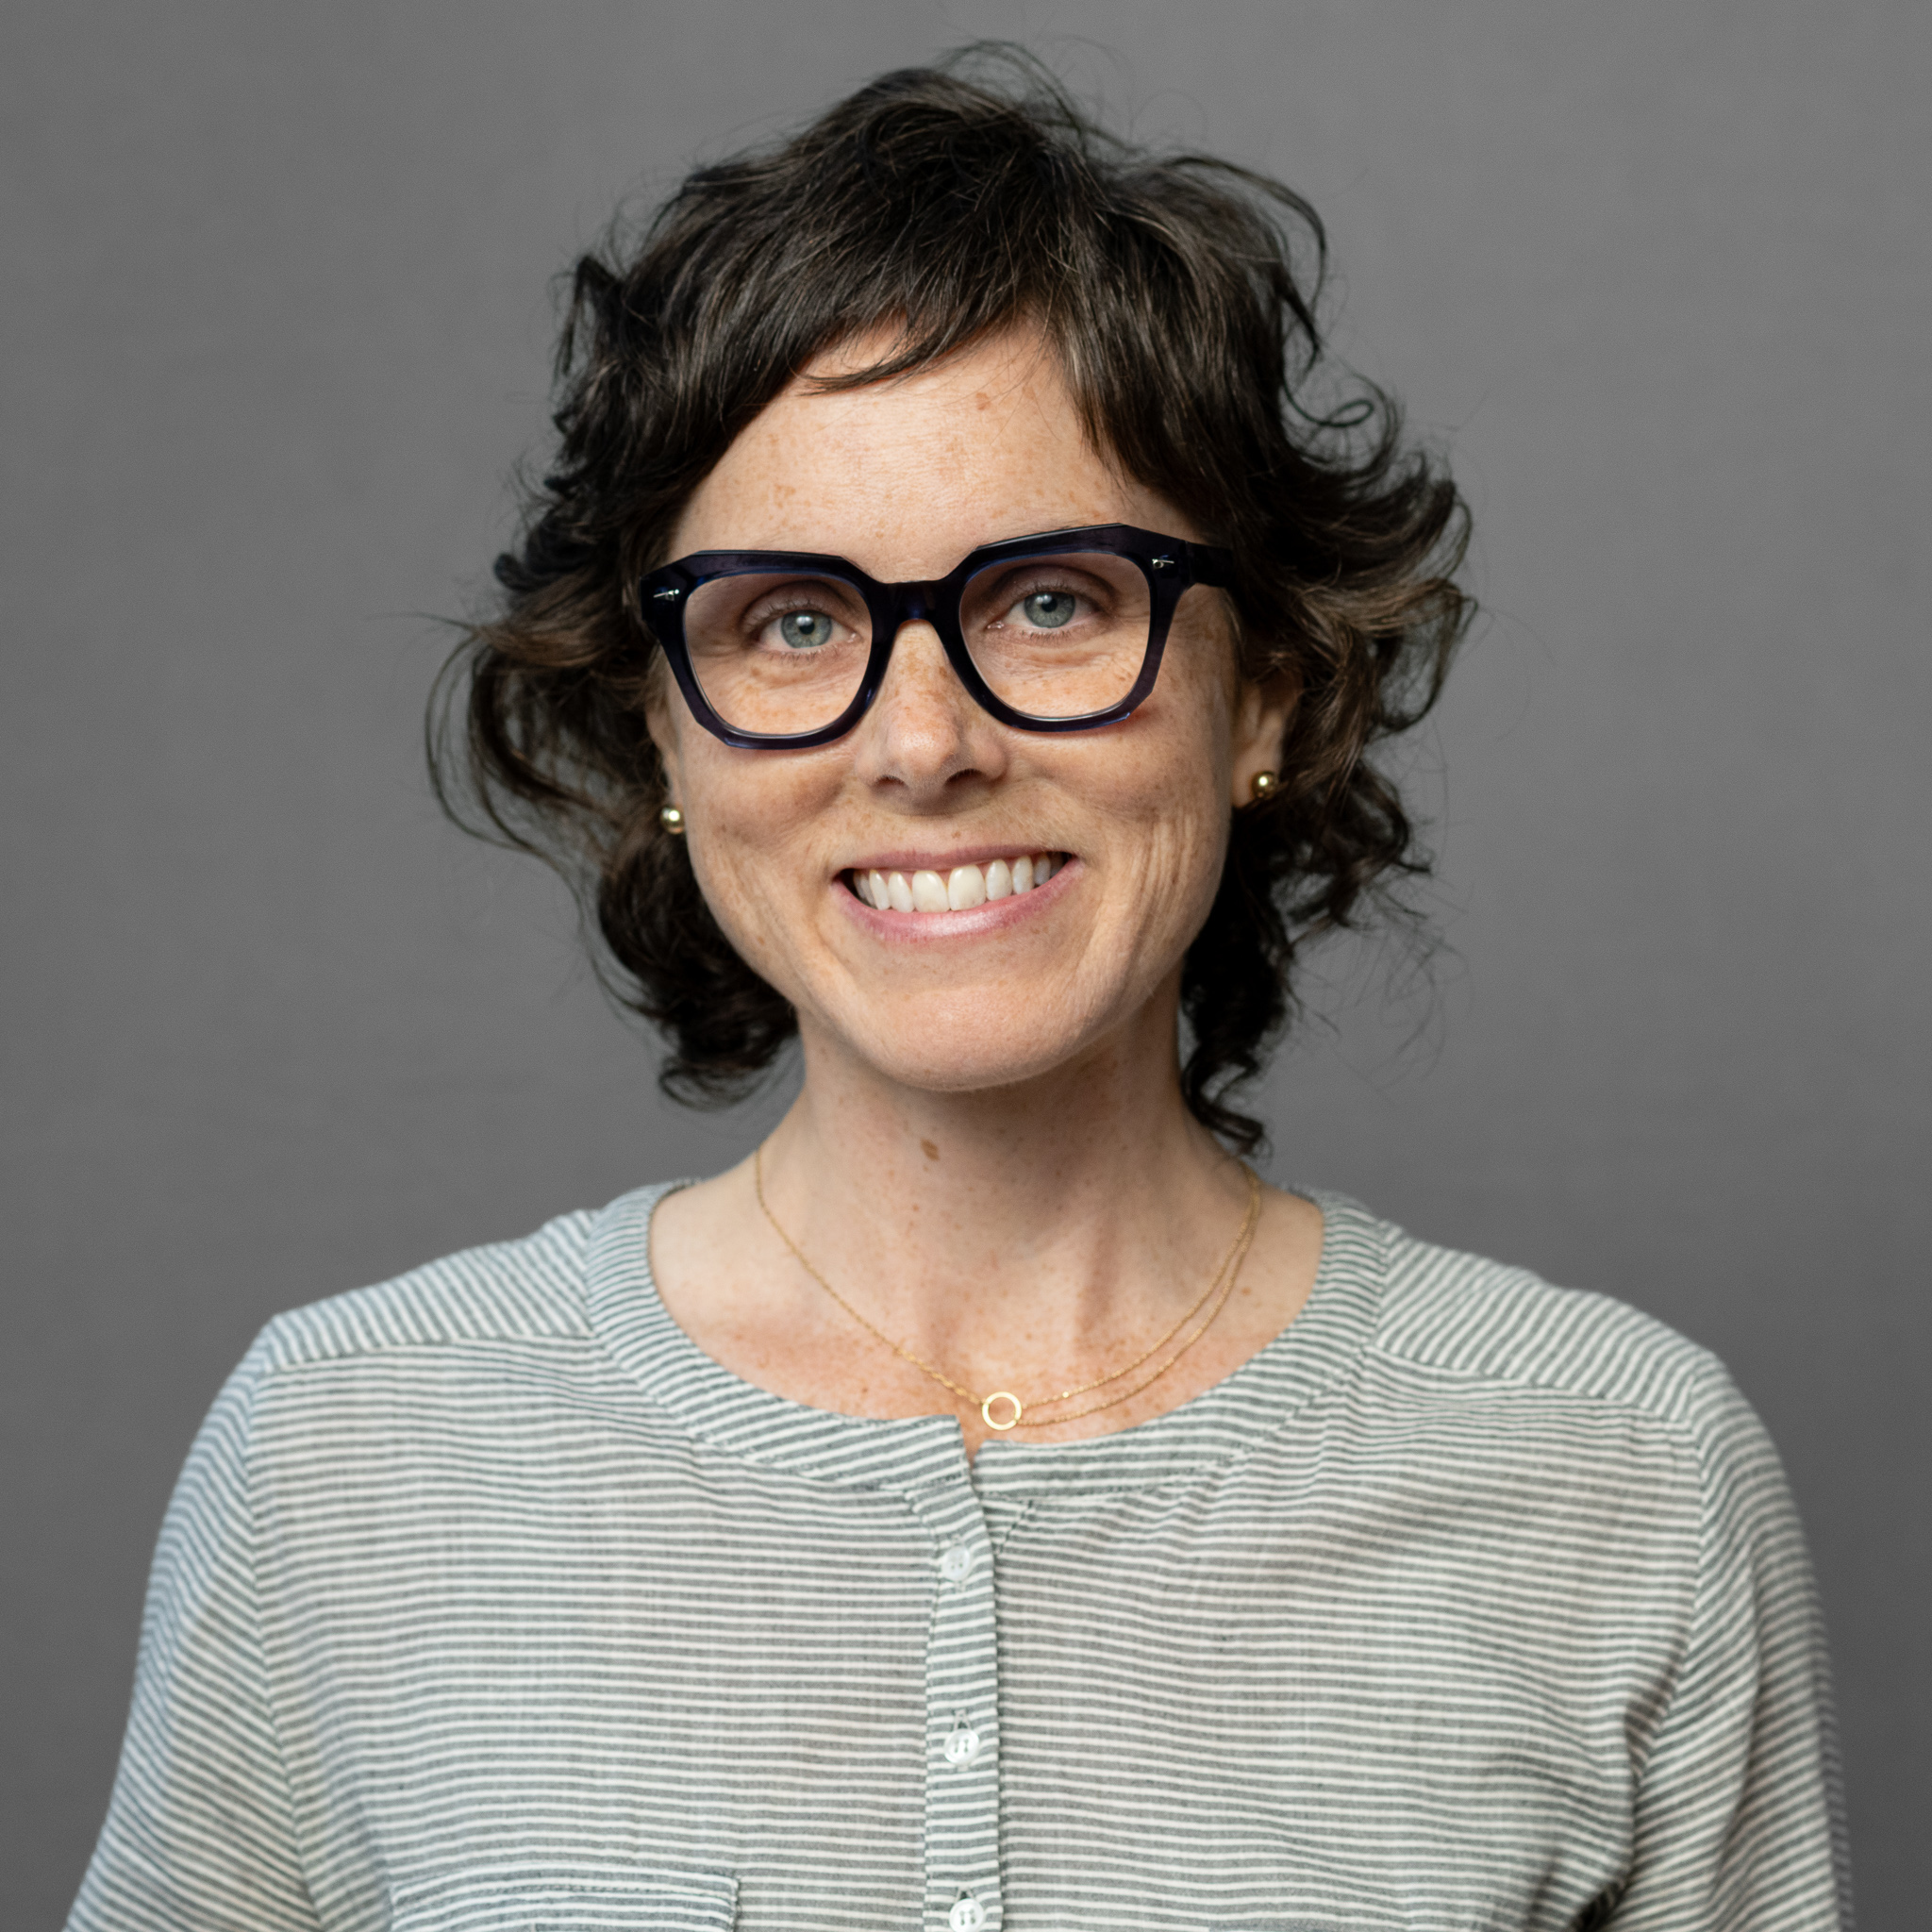 white woman with short dark brown hair, dark blue thick rimmed glasses, and gray shirt smiling